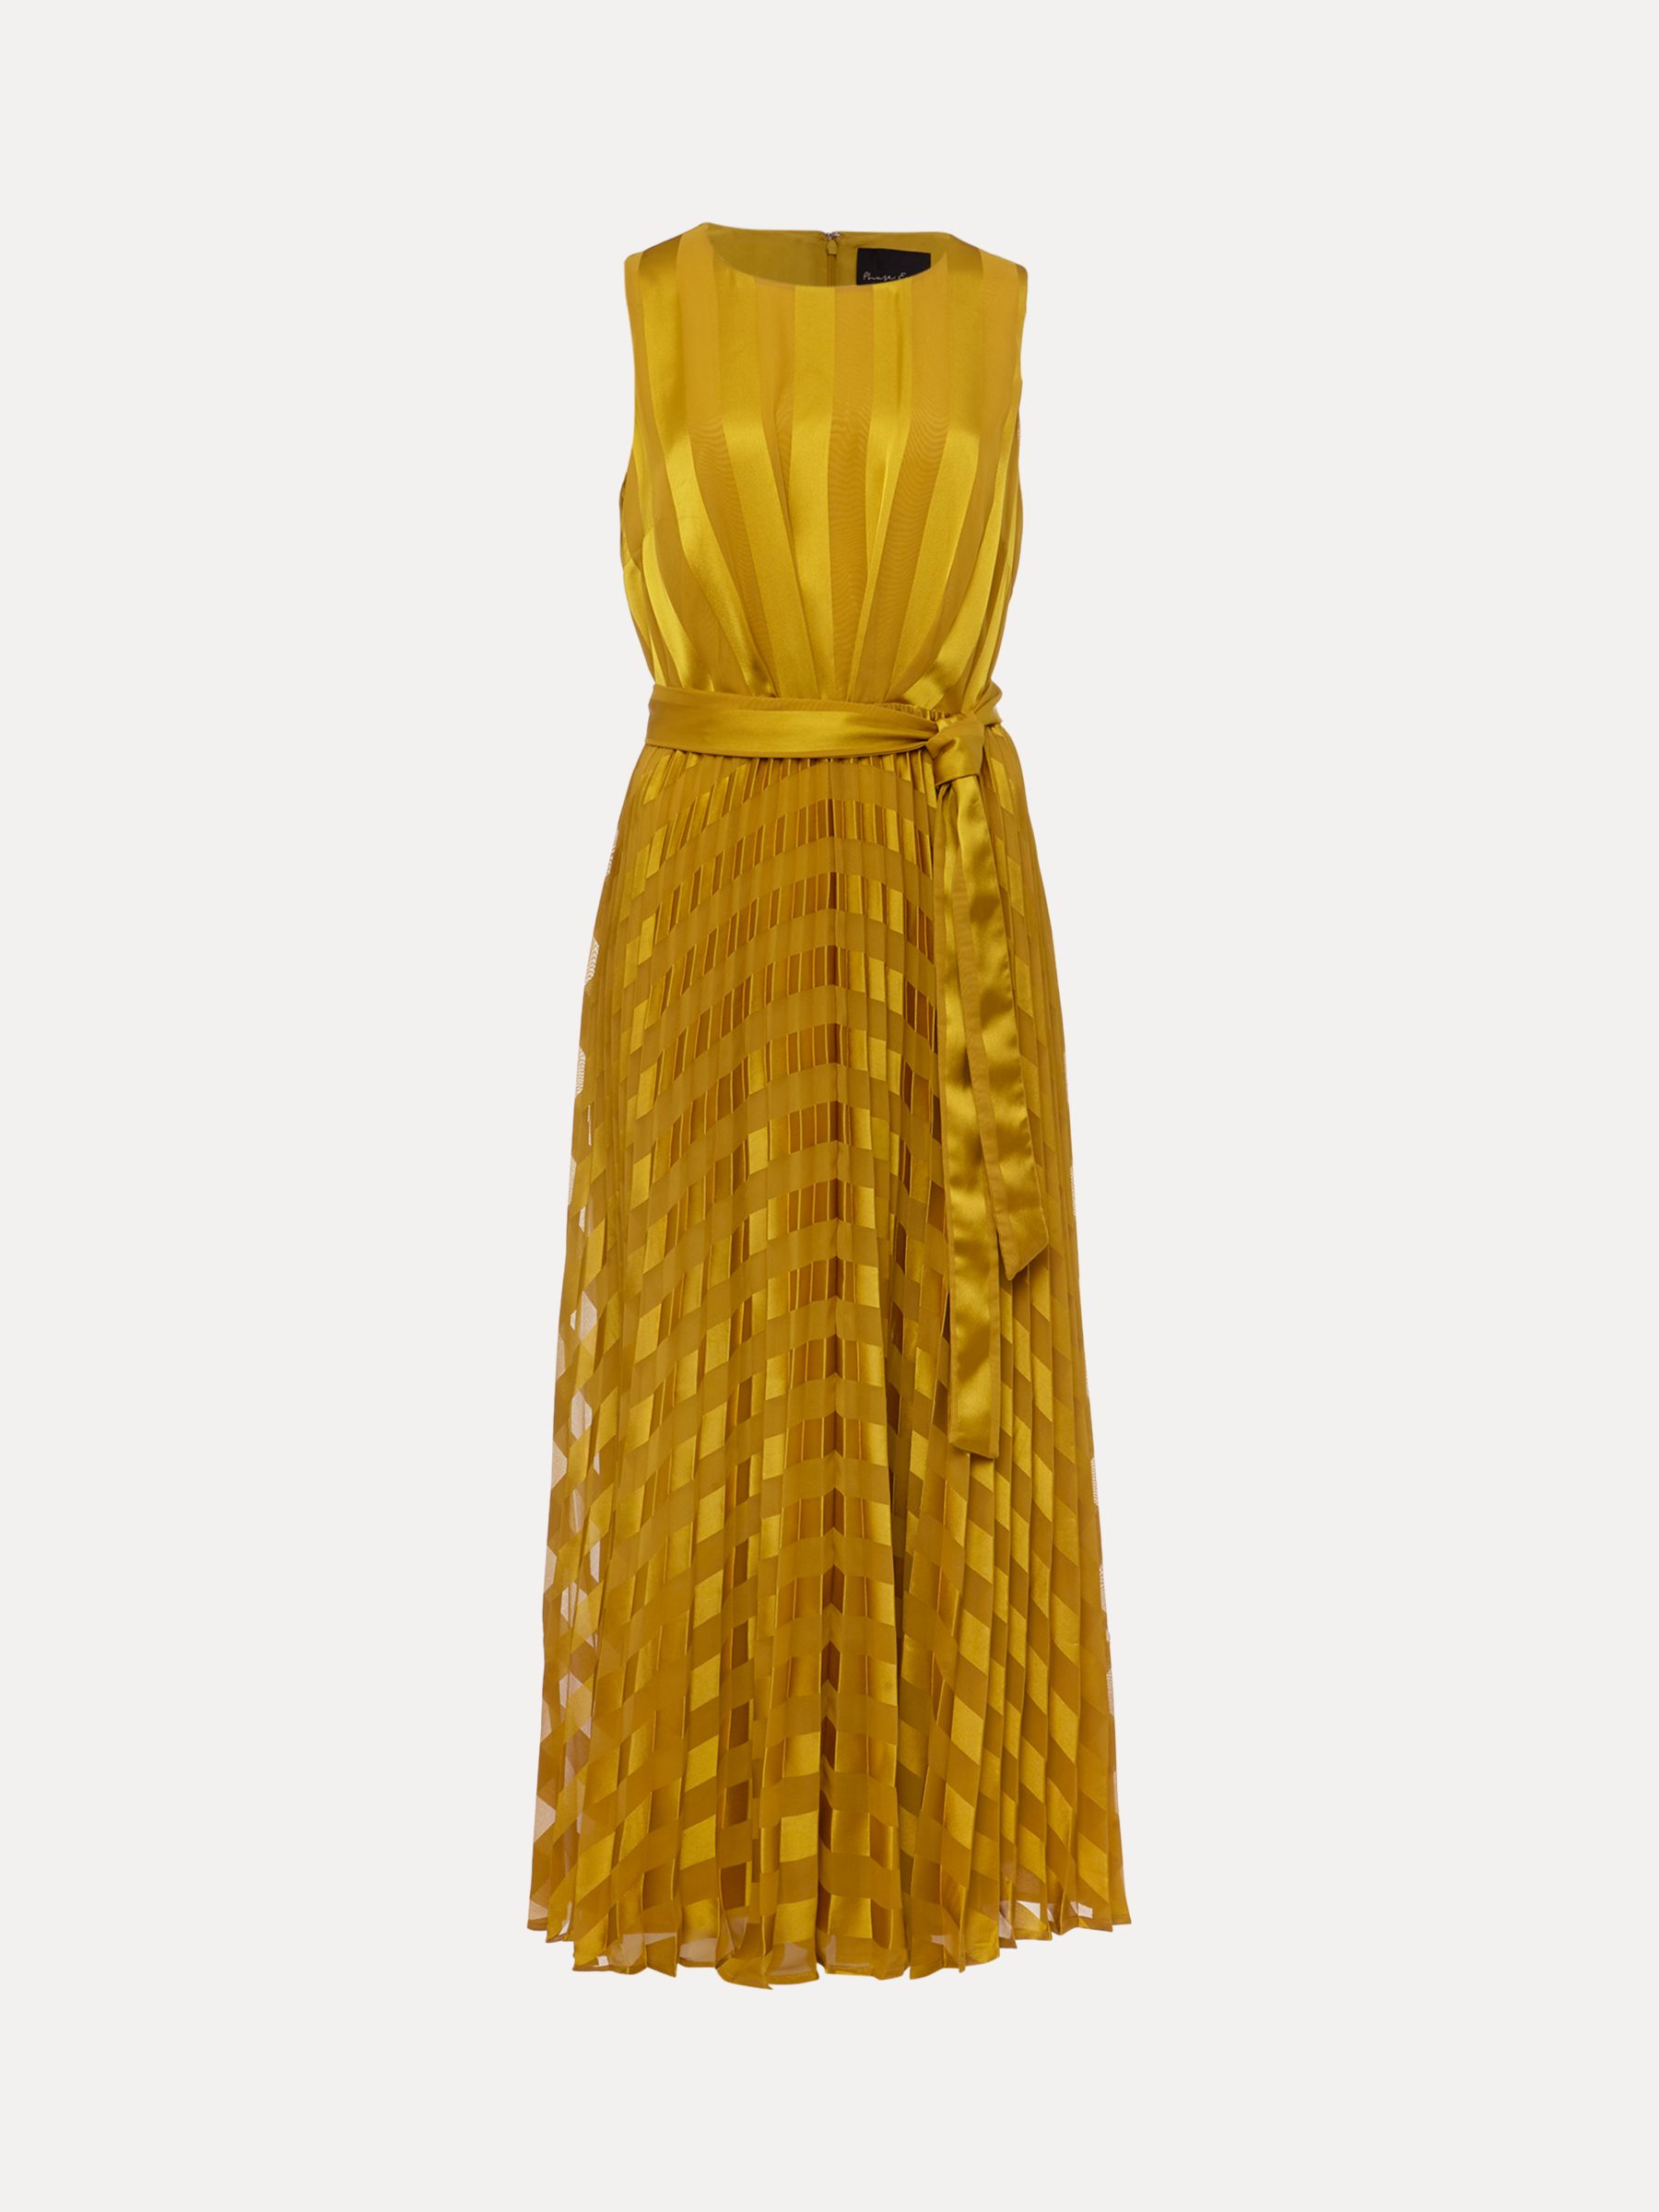 Phase Eight Beverley Striped Pleated Midi Dress, Chartreuse, 8